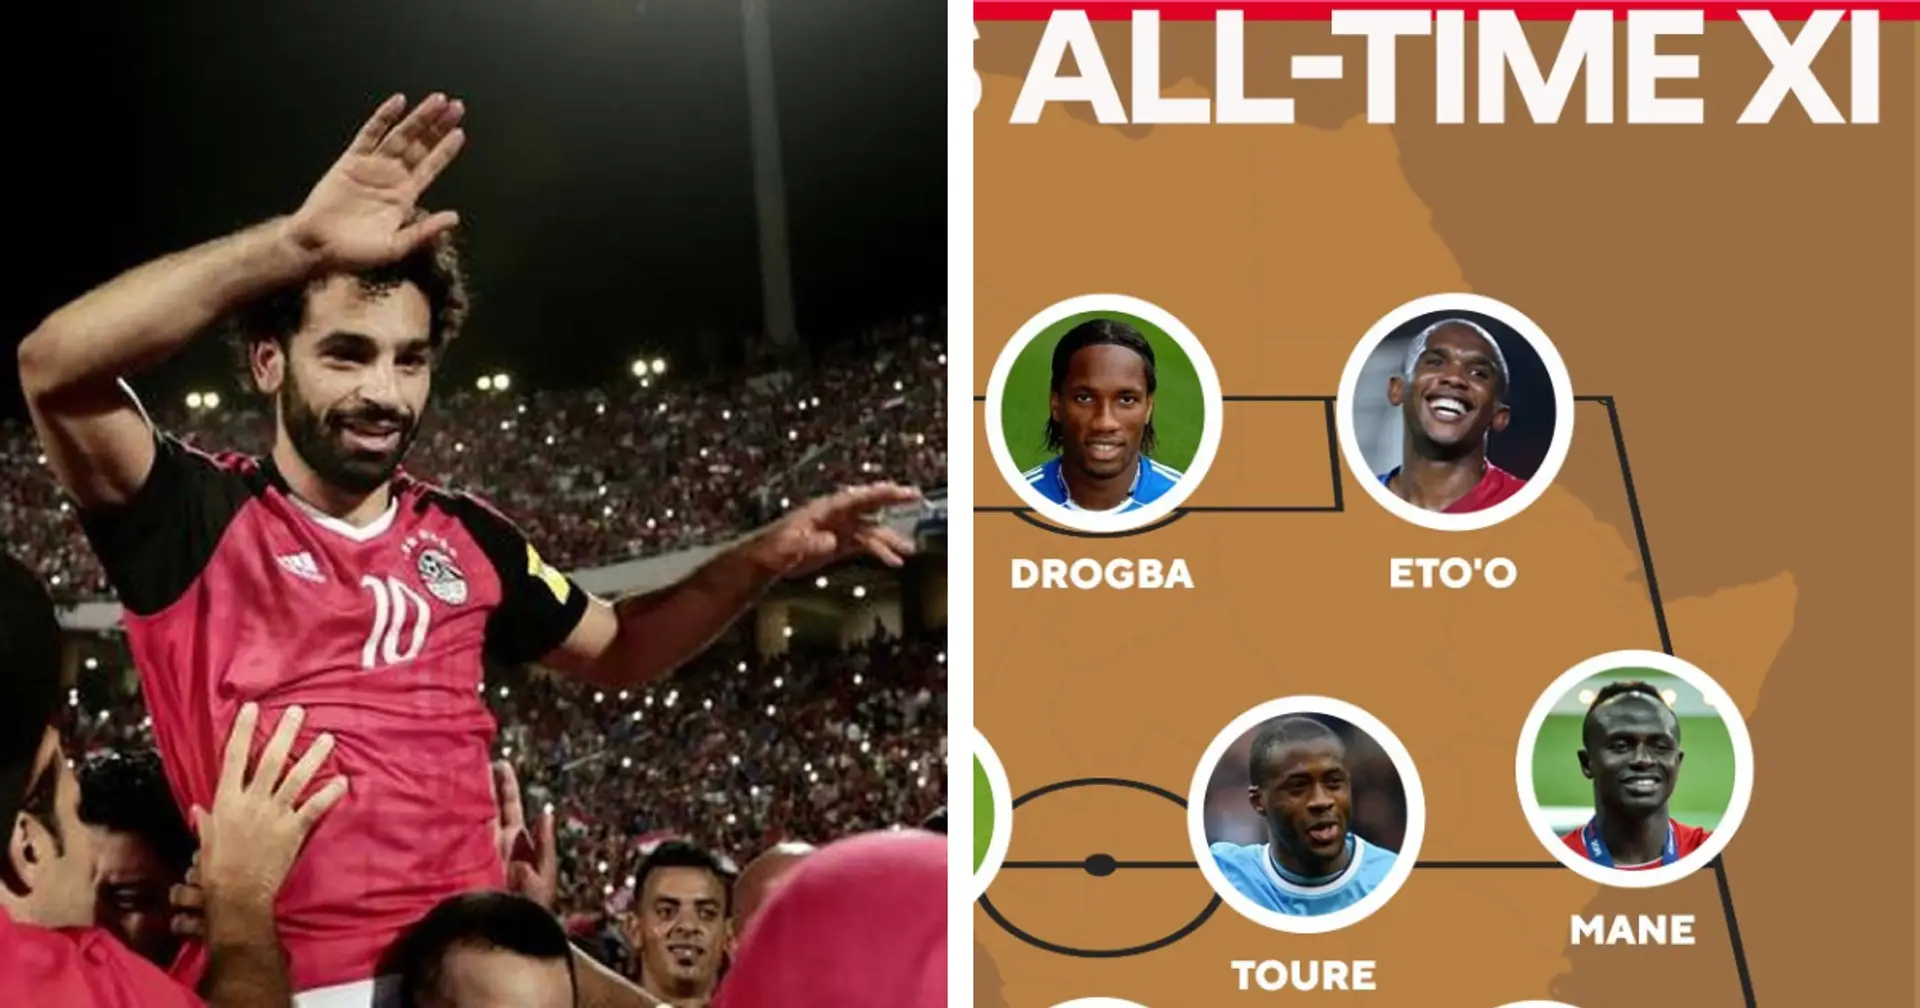 Mane and Salah in unusual roles plus one former Liverpool player make Tribuna.com's all-time Africa XI